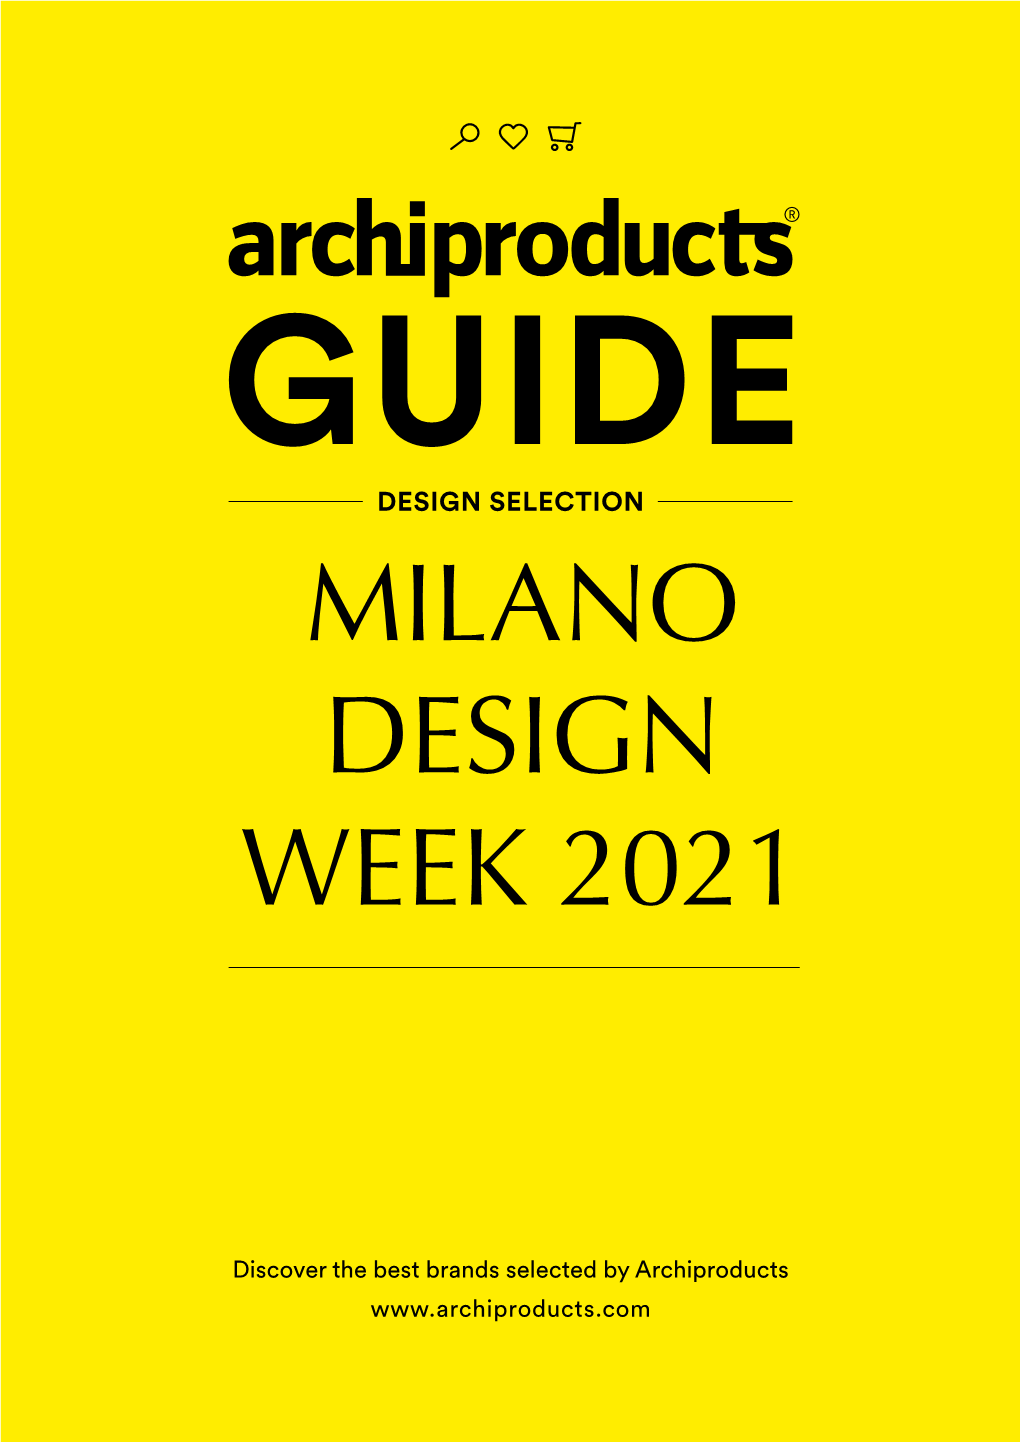 Discover the Best Brands Selected by Archiproducts FOLLOW the DESIGN SELECTION ICONS Discover the Best Brands Selected by Archiproducts Throughout Milan